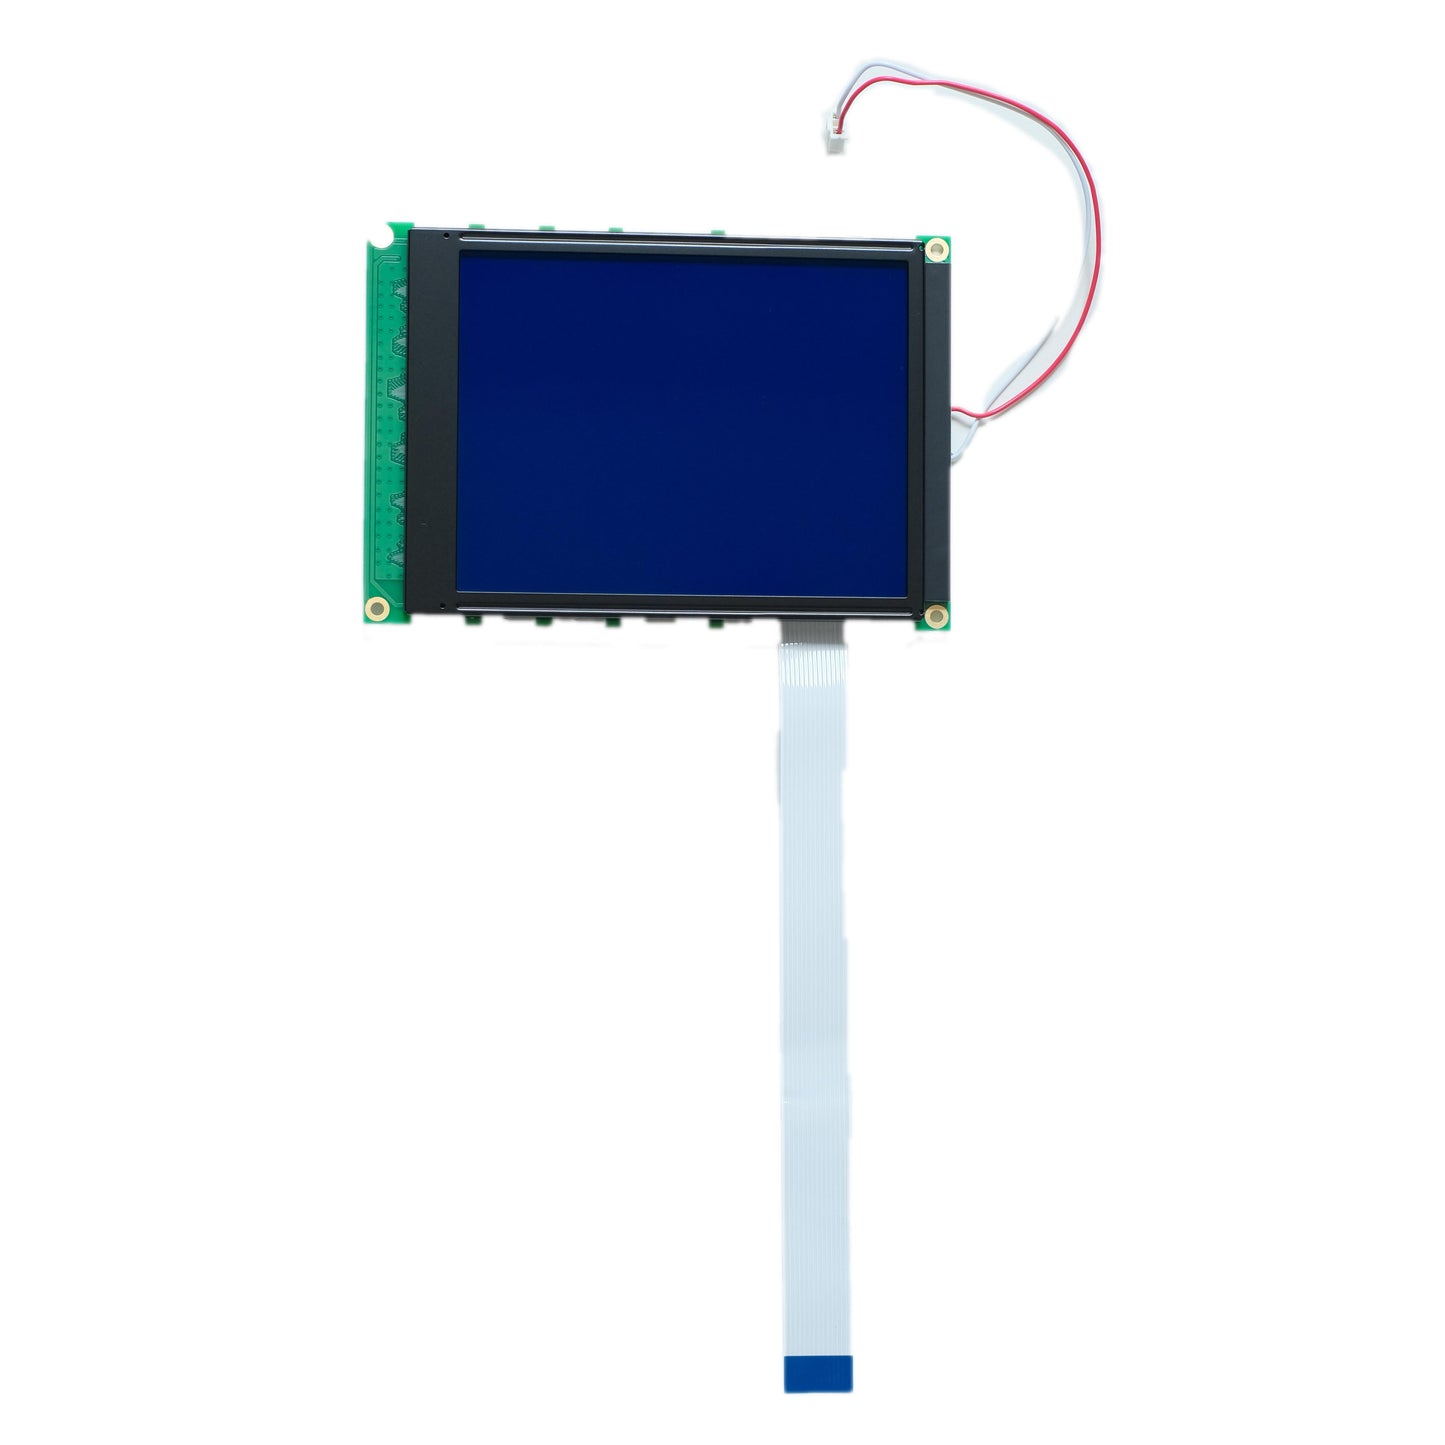 6-inch blue graphic LCD with 320x240 resolution, interfaced with MCU